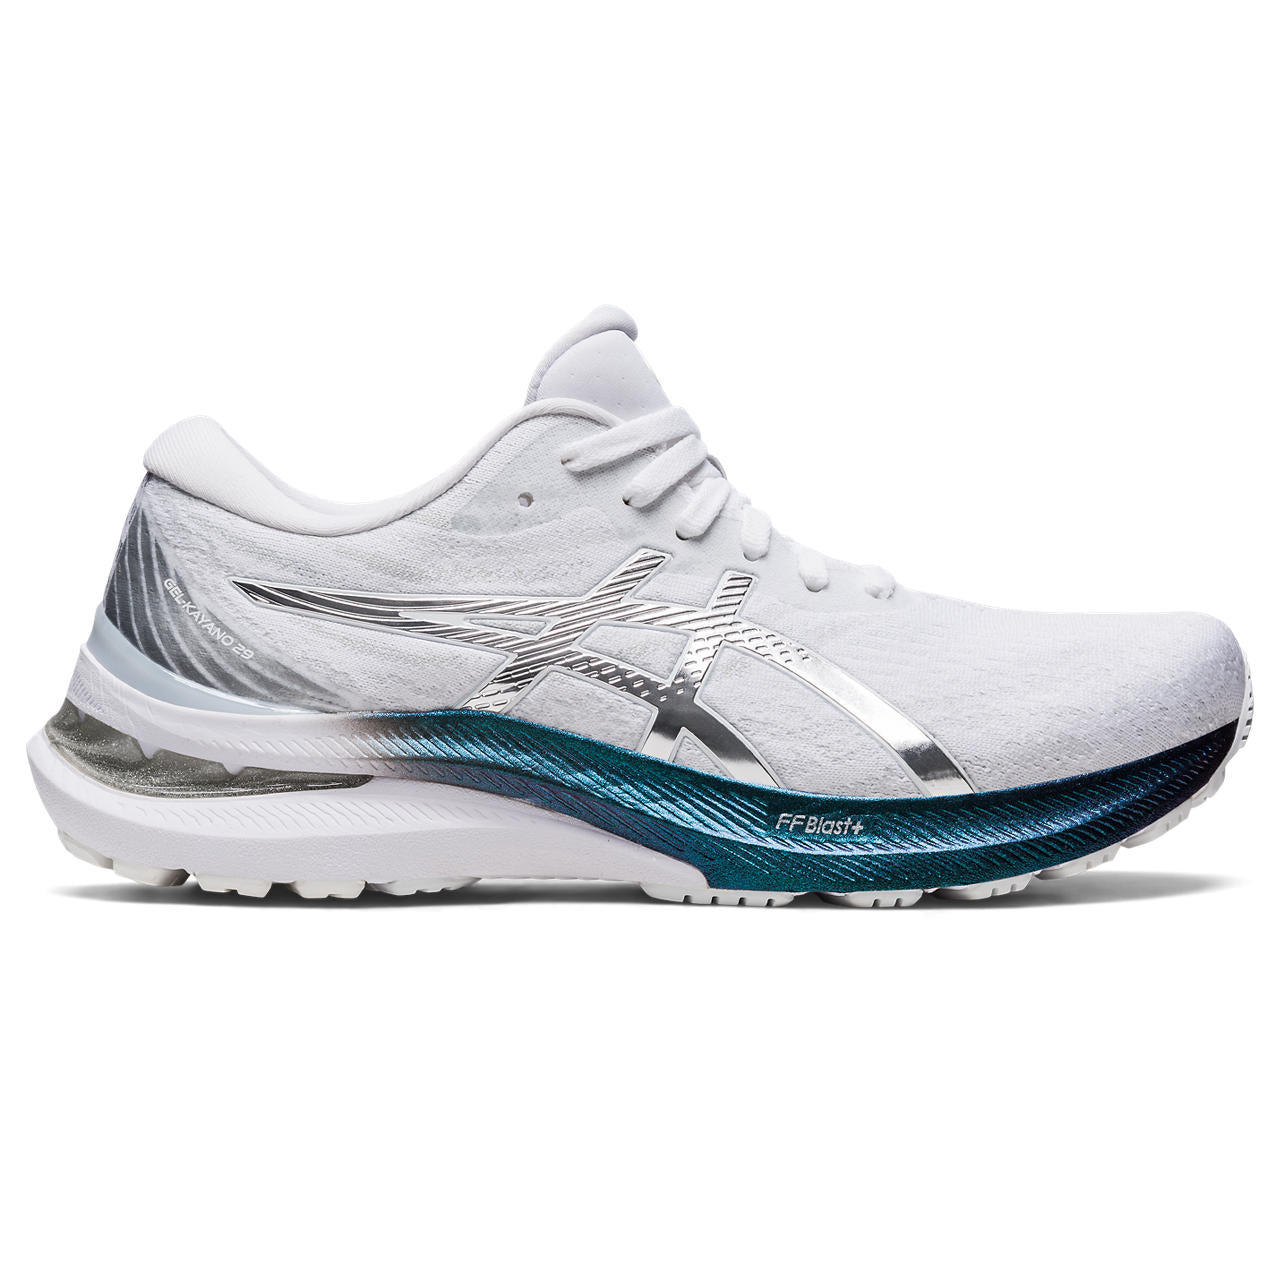 The Gel-Kayano 29 creates a stable running experience and a more responsive feel underfoot. It's colorway features silver accents on the upper that are complemented with an iridescent finish on the midsole. Featuring a low-profile external heel counter, this piece comfortably cradles your foot with advanced rearfoot support.  This is the Kayano Platinum model in the color White / Pure Silver.